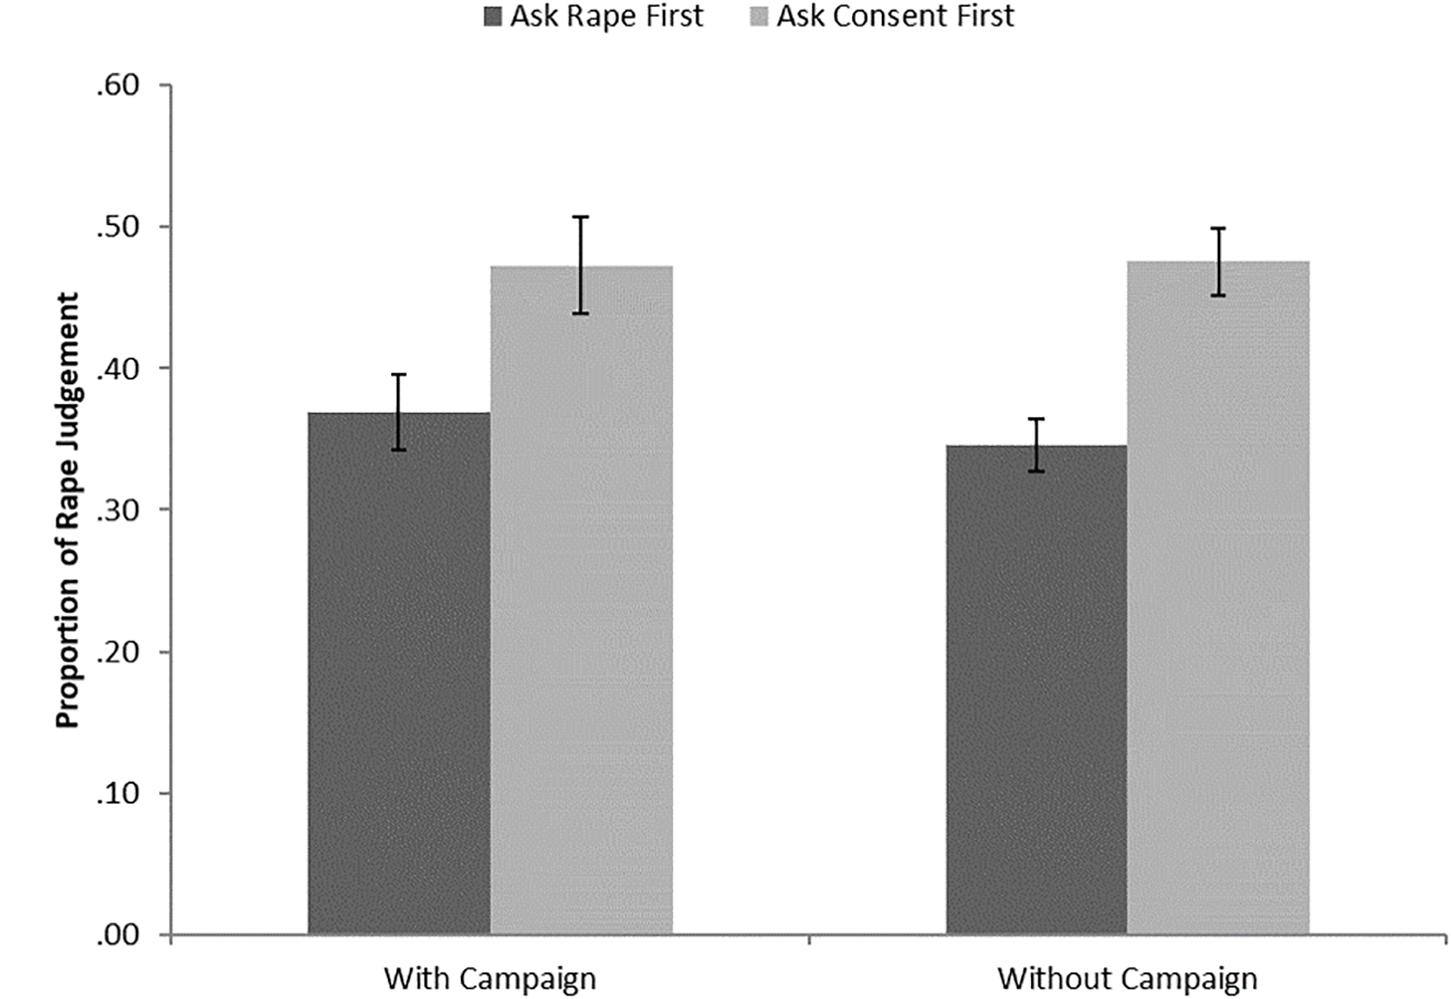 Puran Sex Rep Video - Frontiers | The Effect of Passively Viewing a Consent Campaign Video on  Attitudes Toward Rape